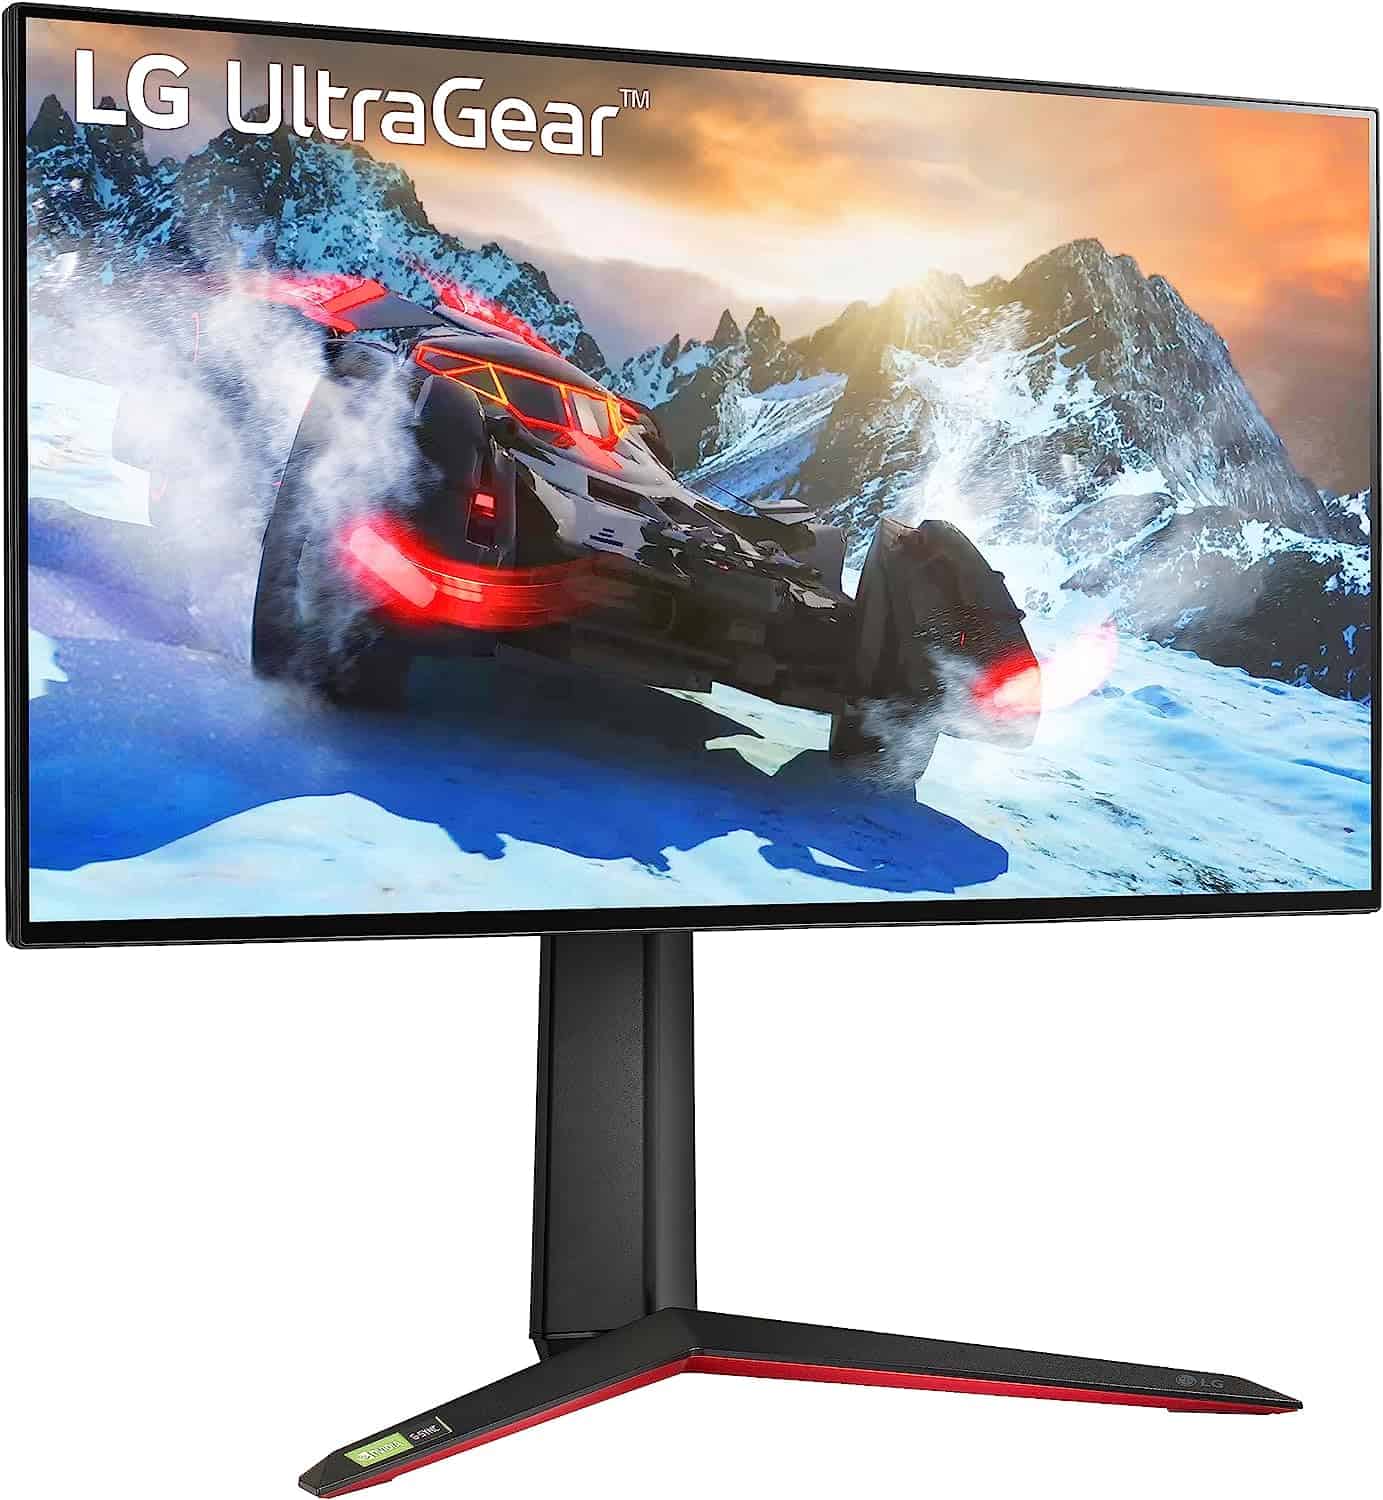 LCD LED monitor for gaming the difference?